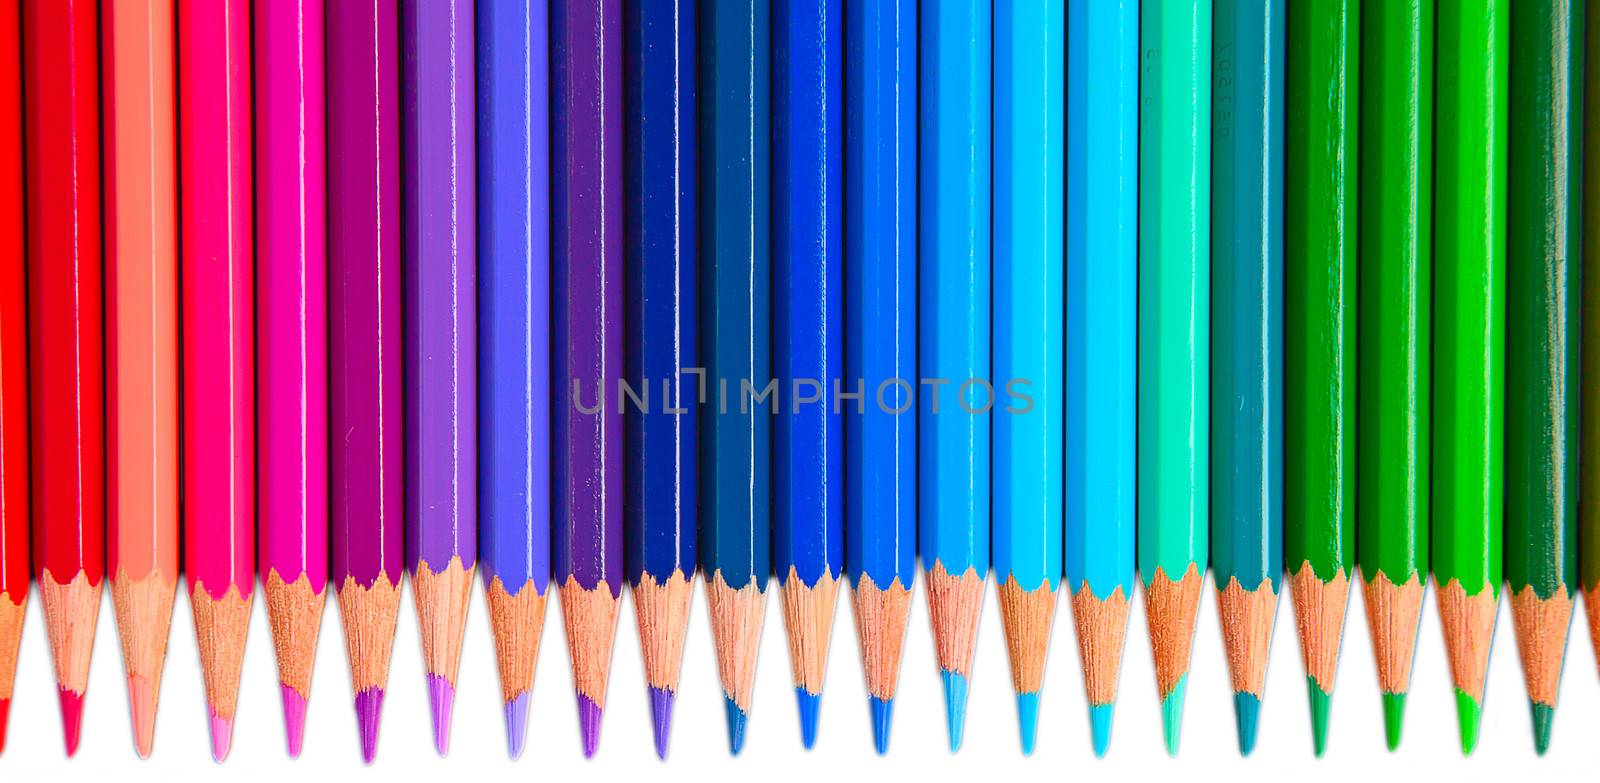 Color pencils by swisshippo